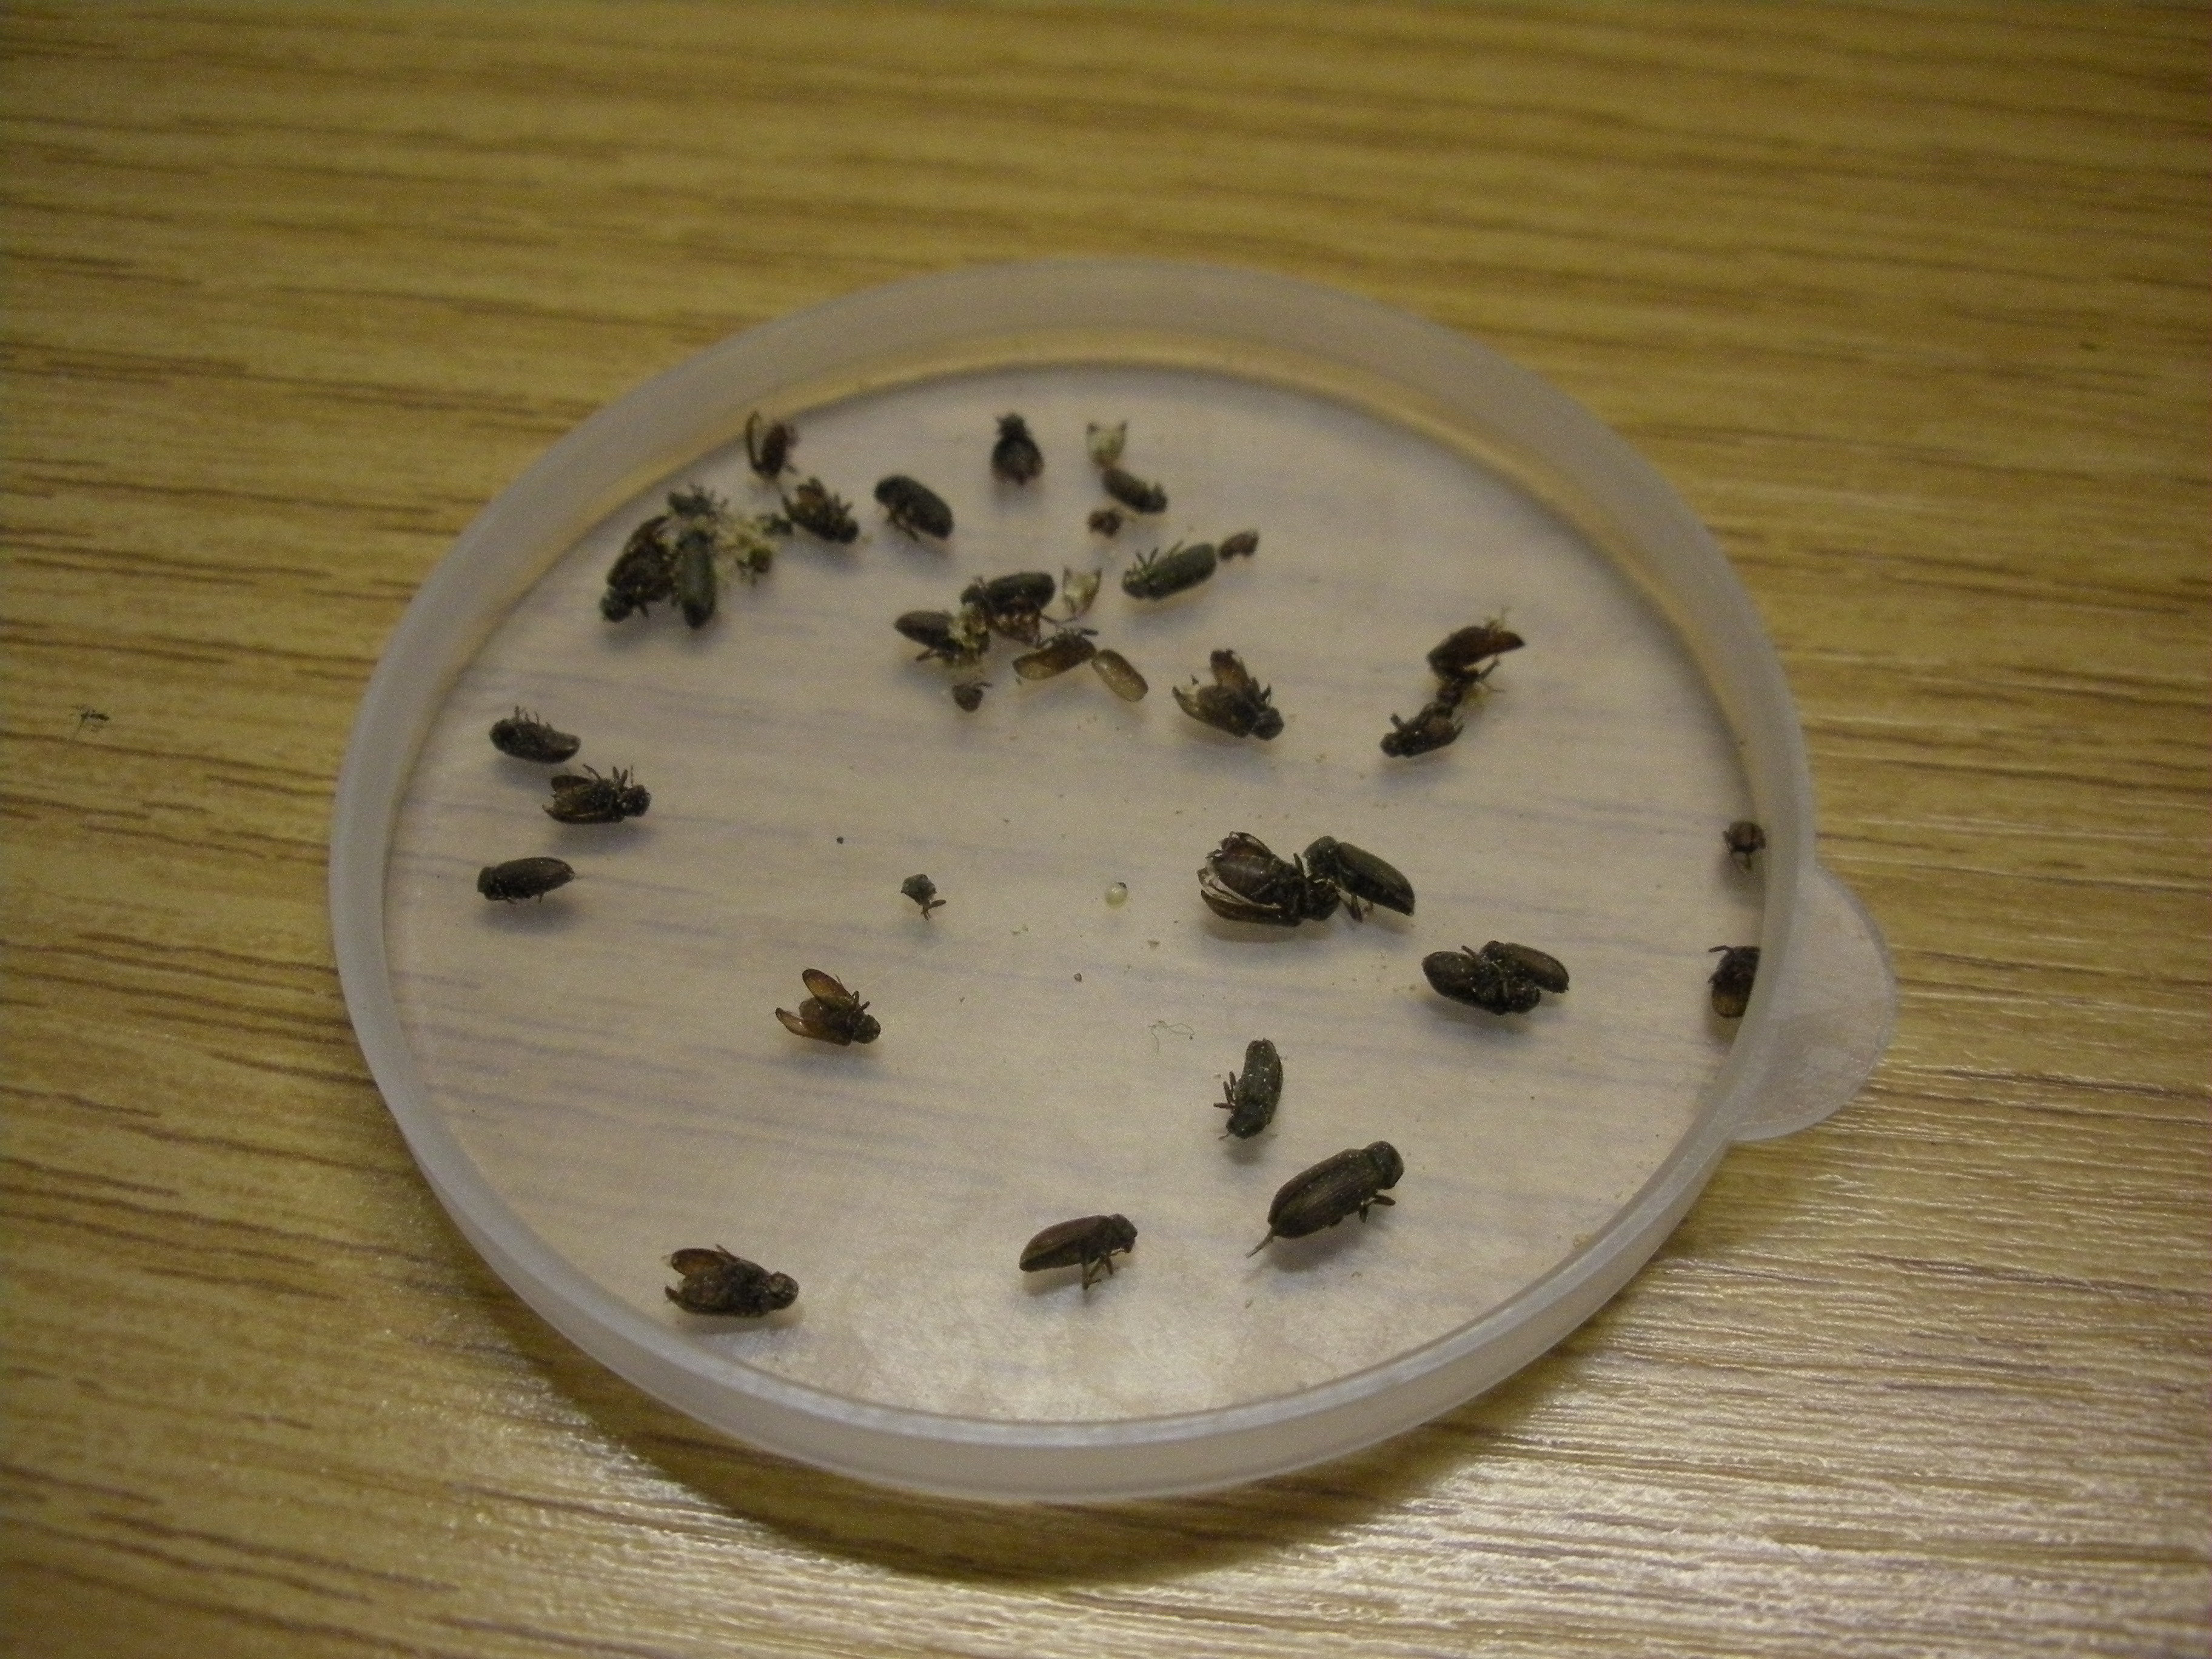 Pests Nostell Priory Conservation Blog